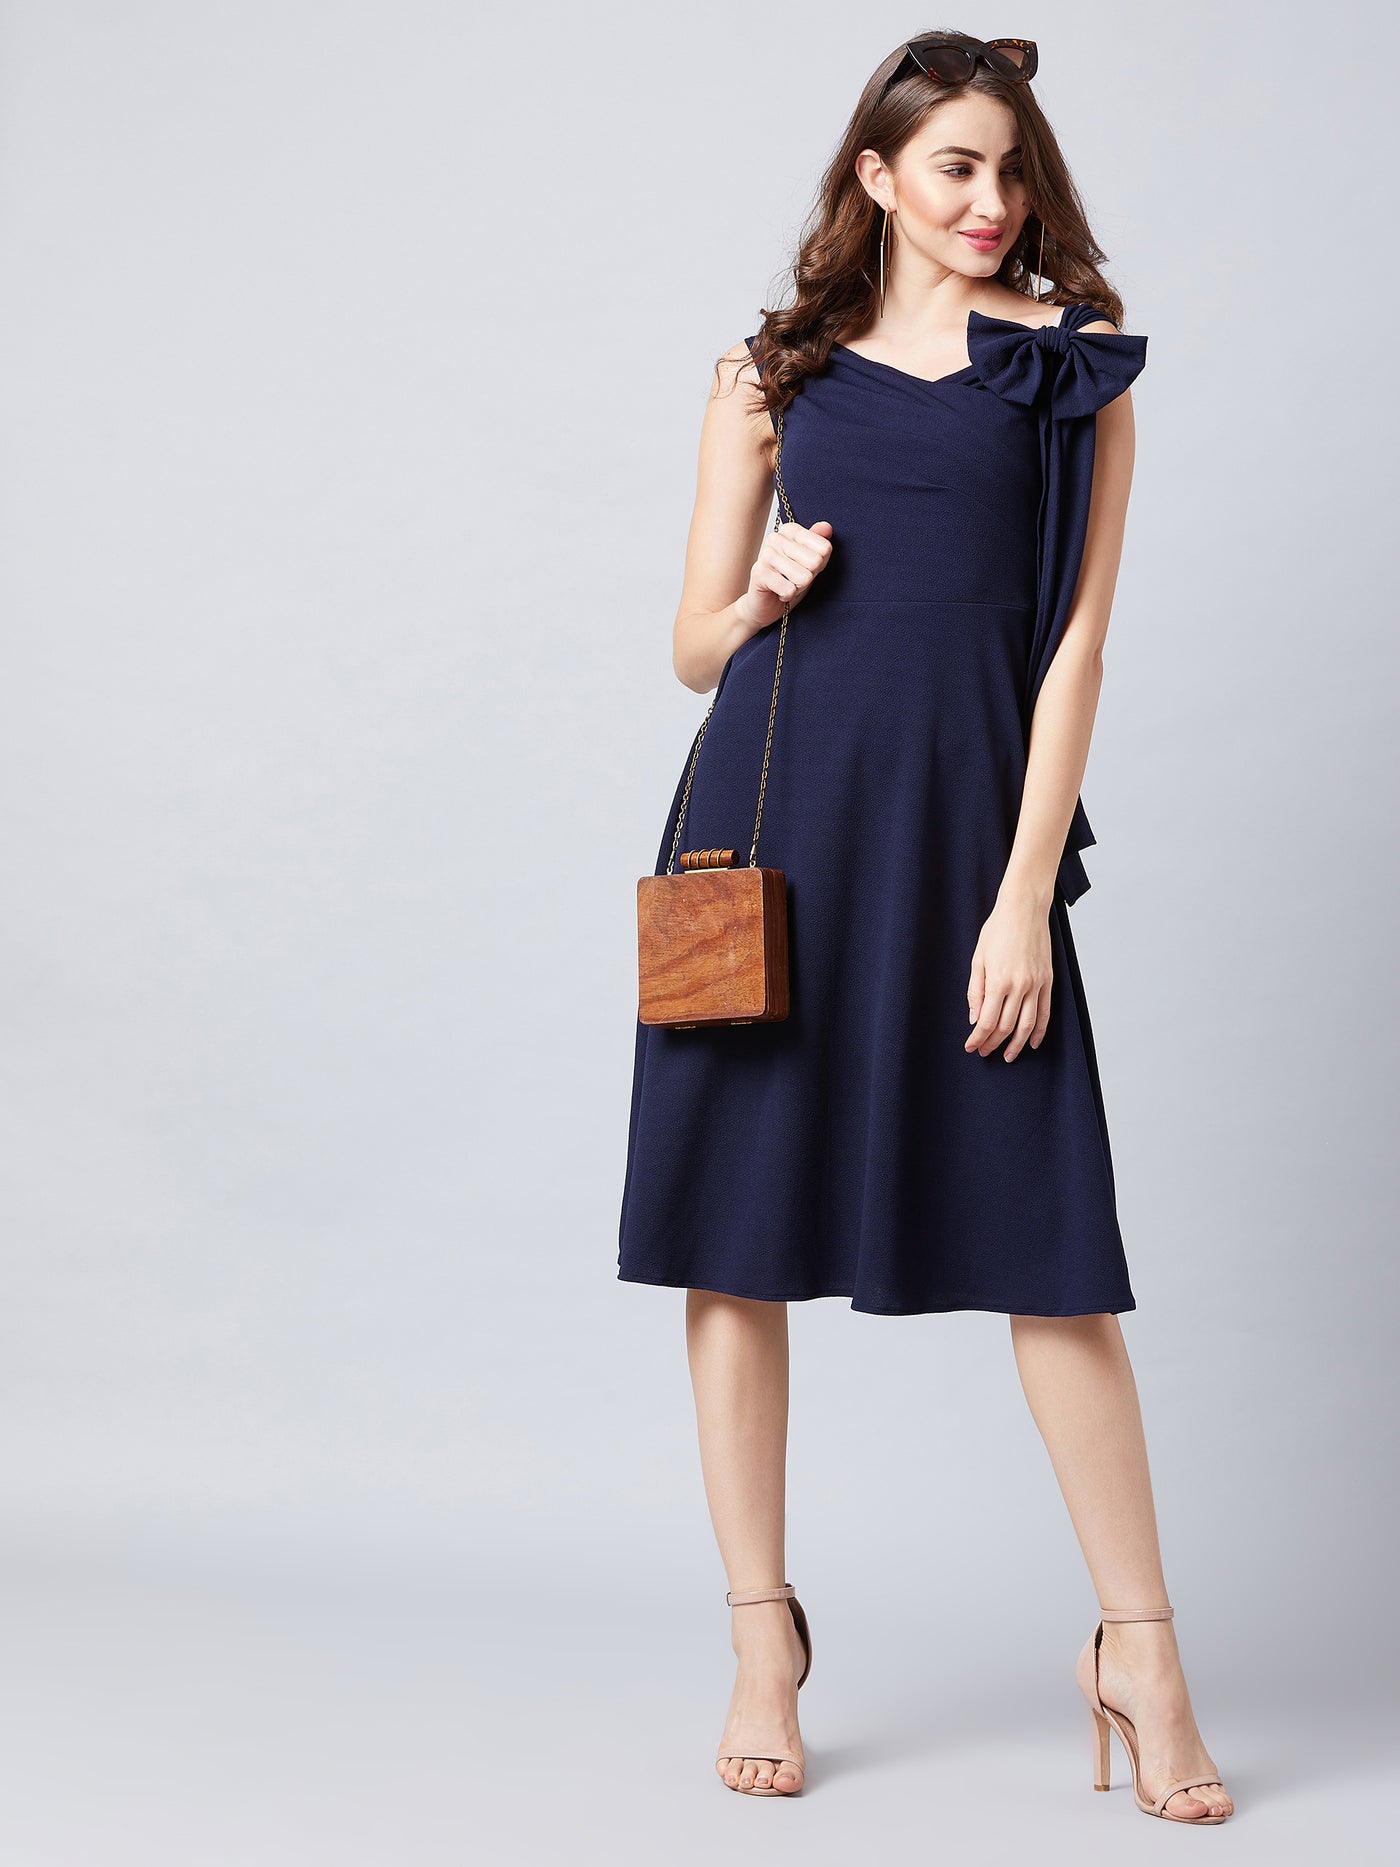 Athena Women Navy Blue Solid Fit and Flare Dress - Athena Lifestyle